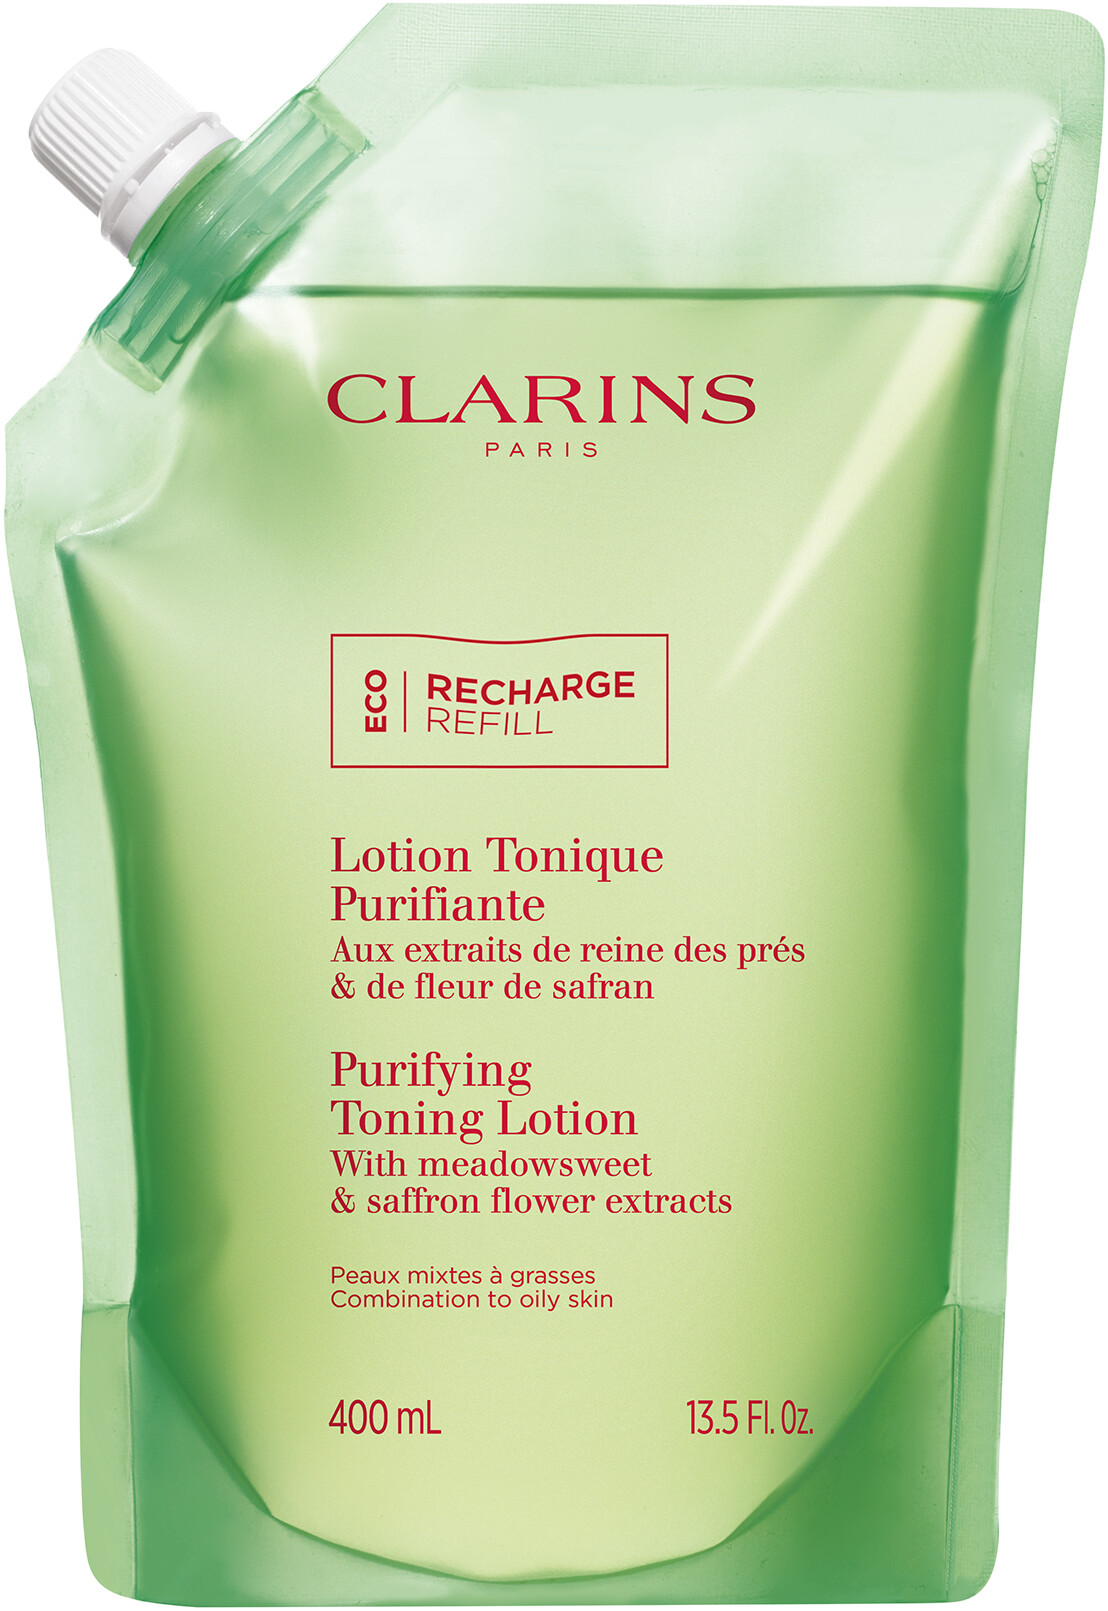 Clarins Purifying Toning Lotion 400ml Refill